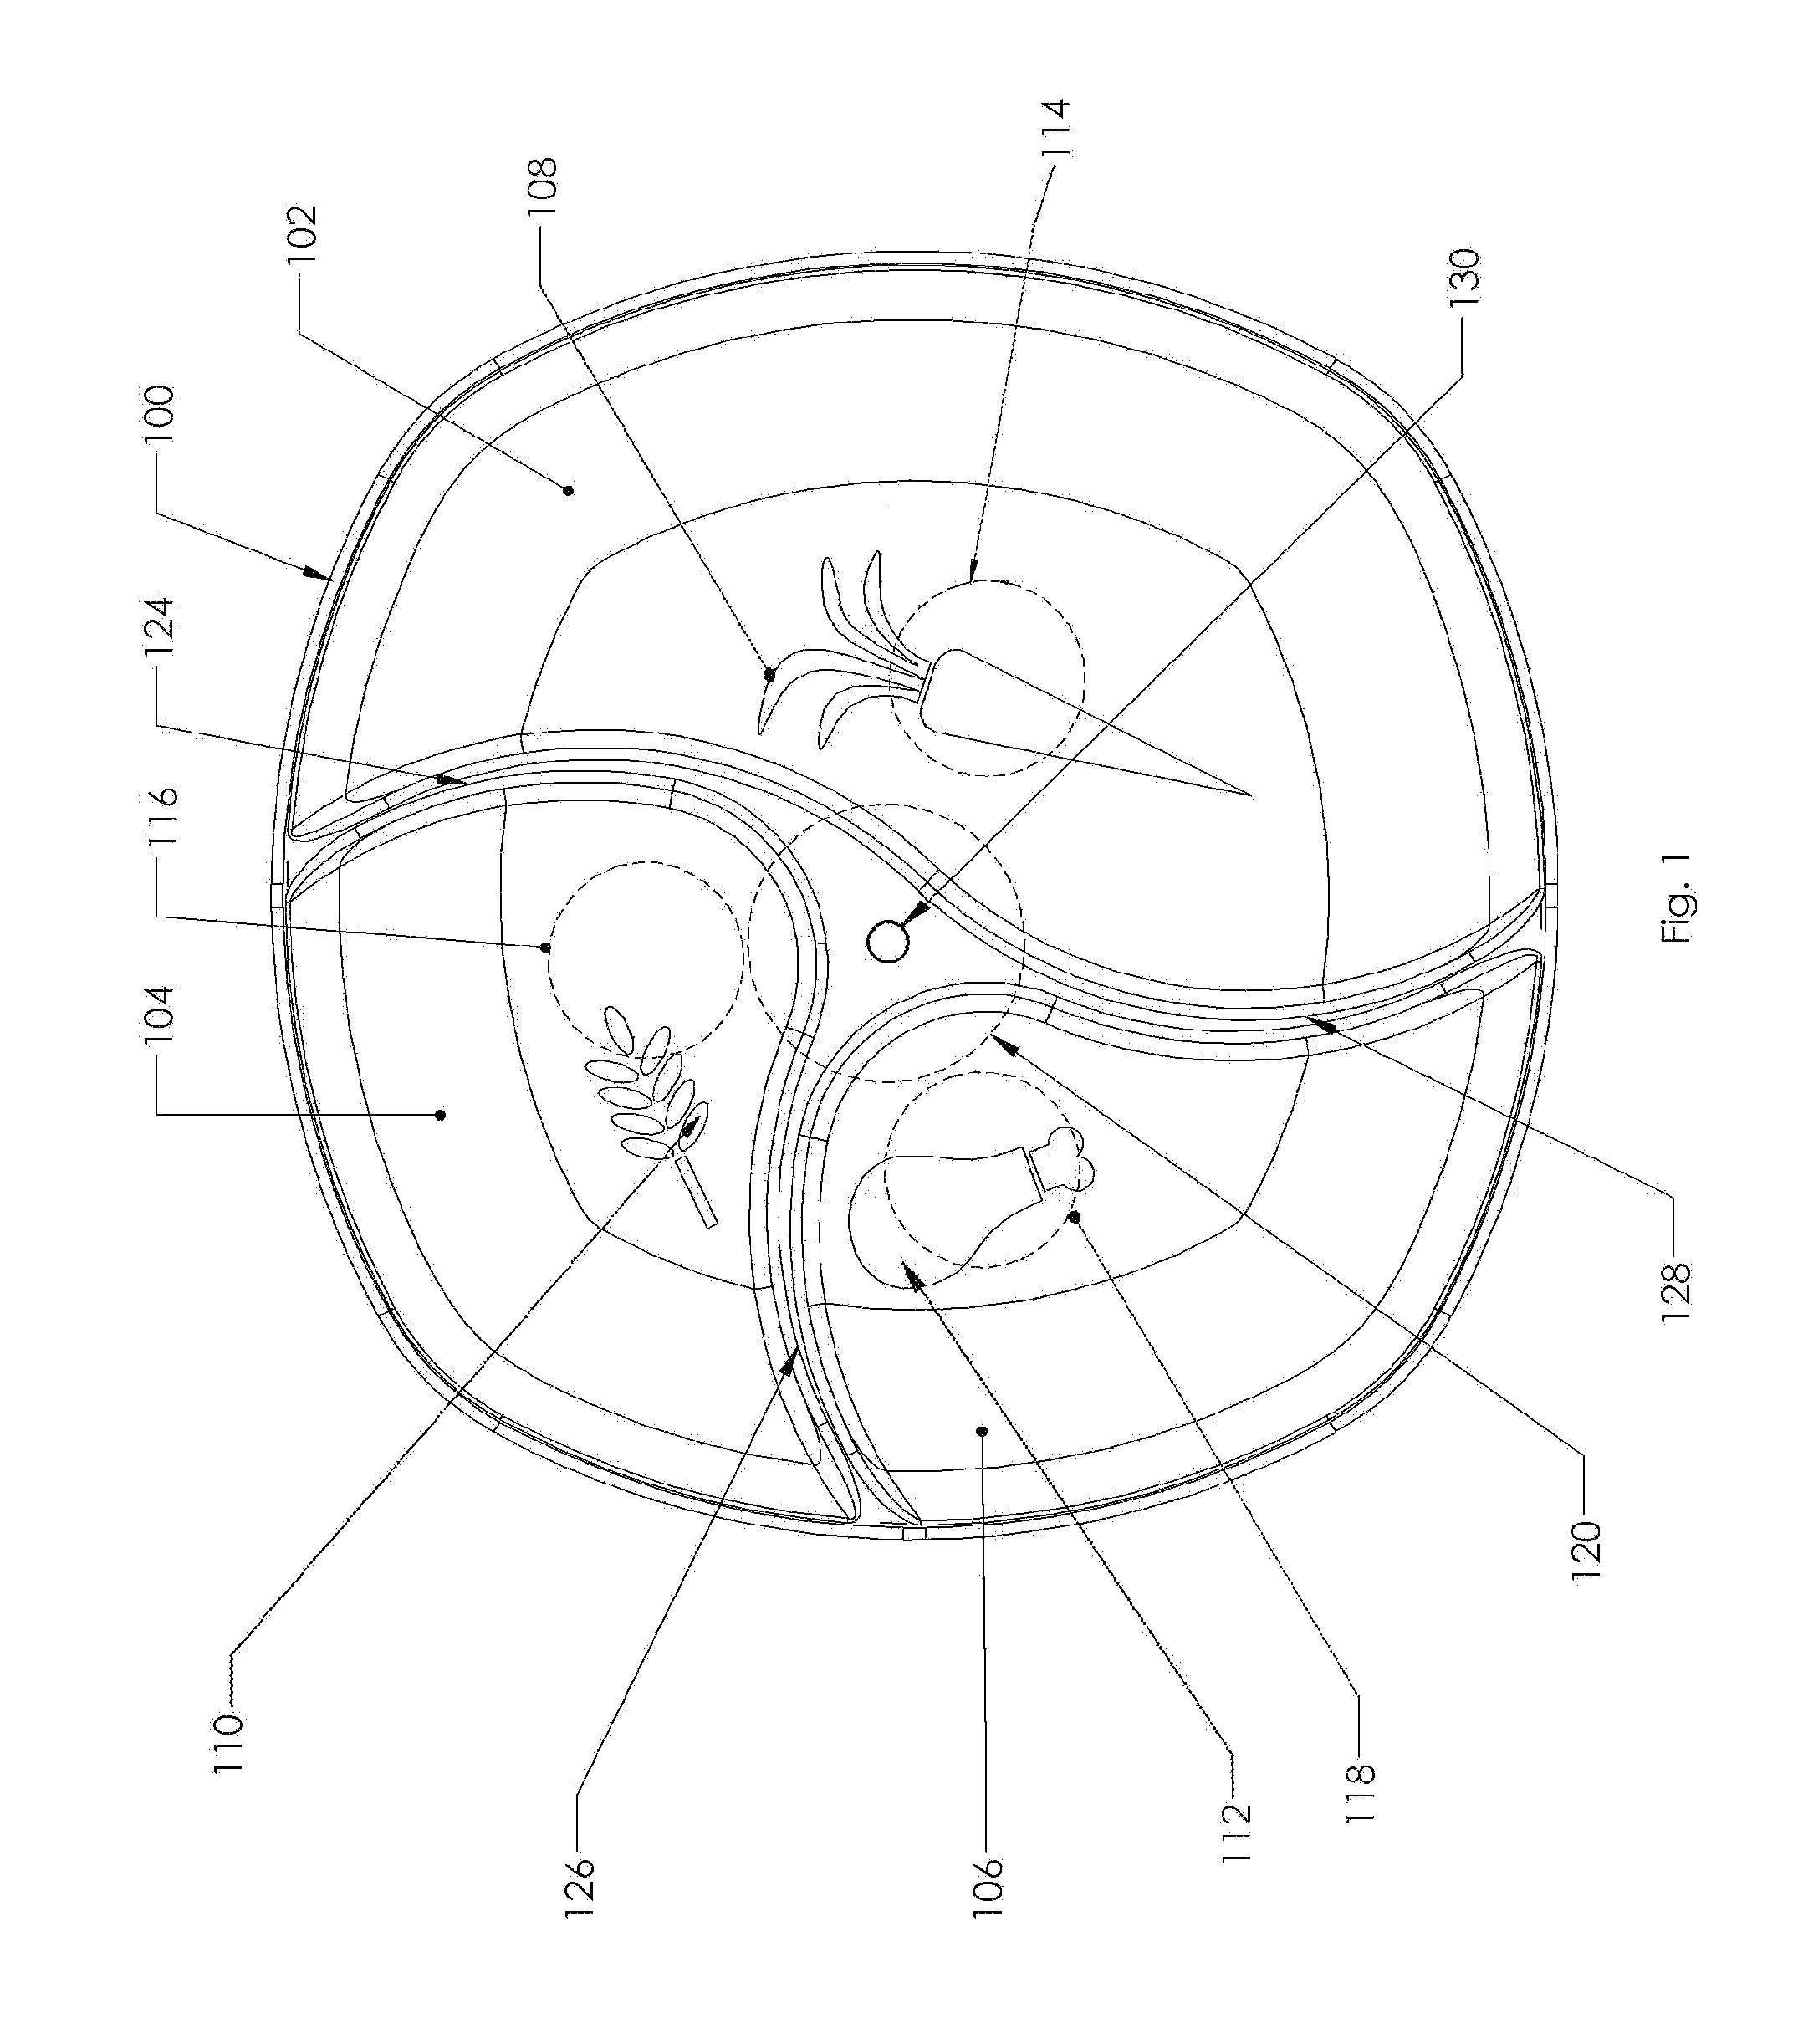 Apparatus and method for identifying food nutritional values